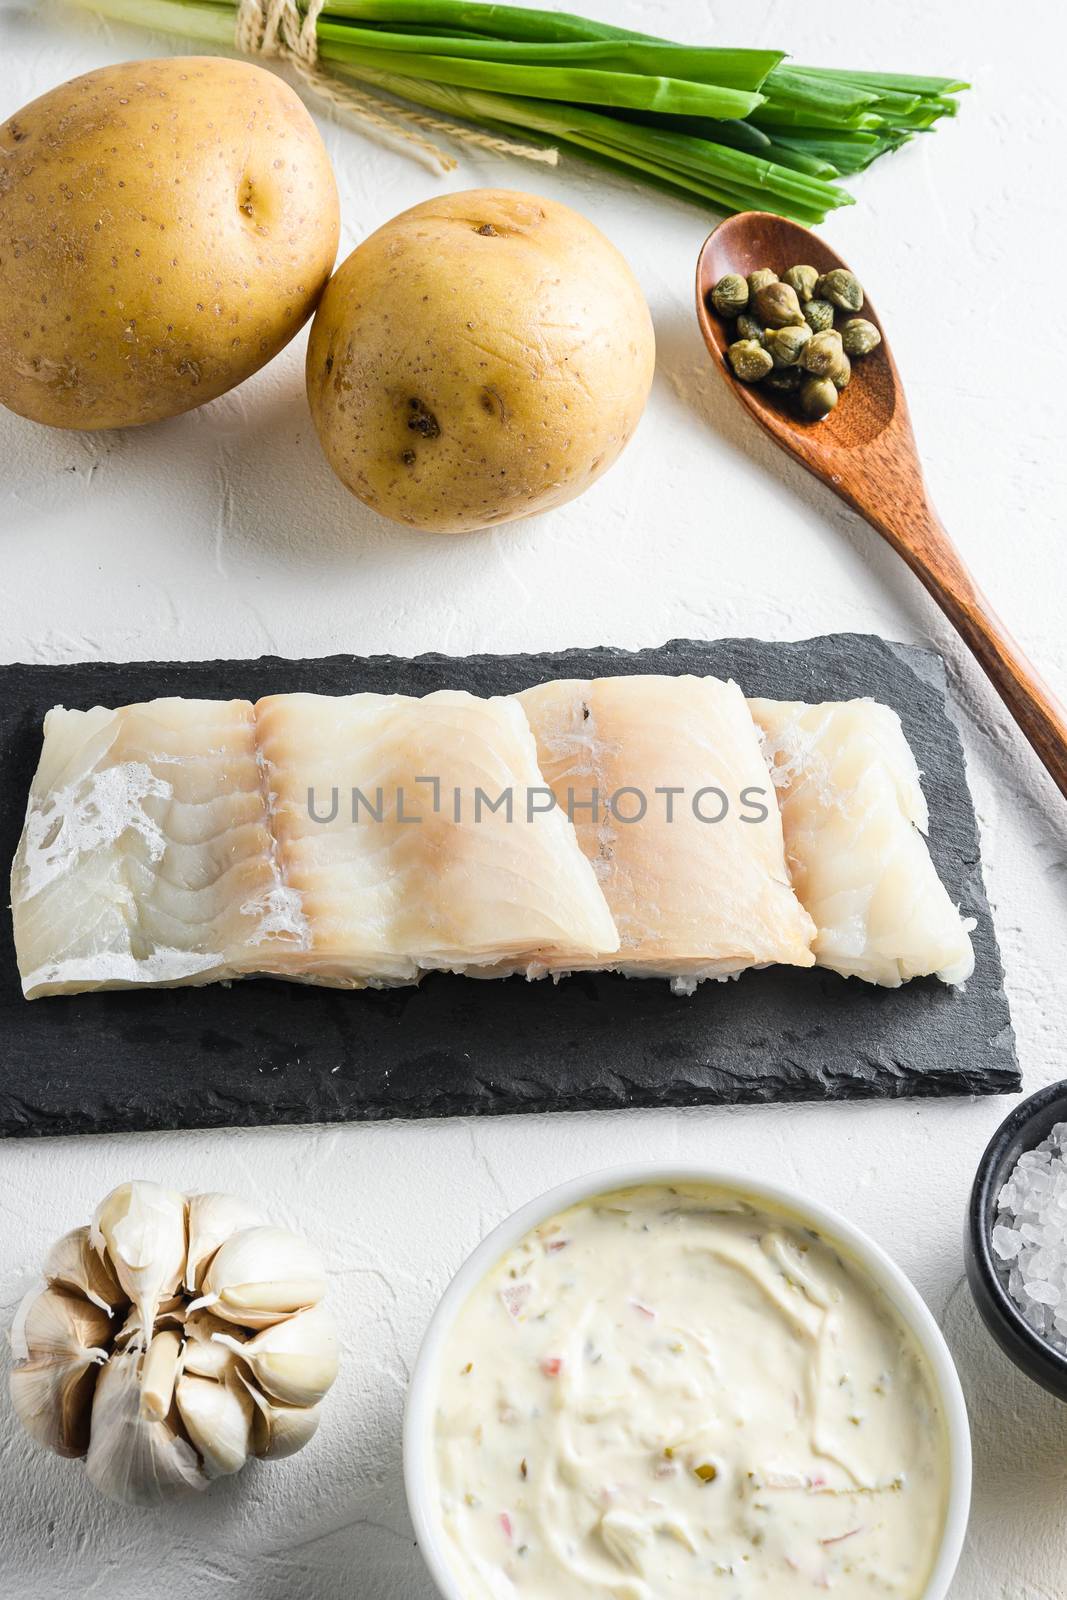 Traditional fish and chips ingredients recipe raw cod fillets on stone slate batter, potatoe, tartar sauce, lemon, capers , green herbs garlic, salt, peppercorns on white stone background side view close up vertical.